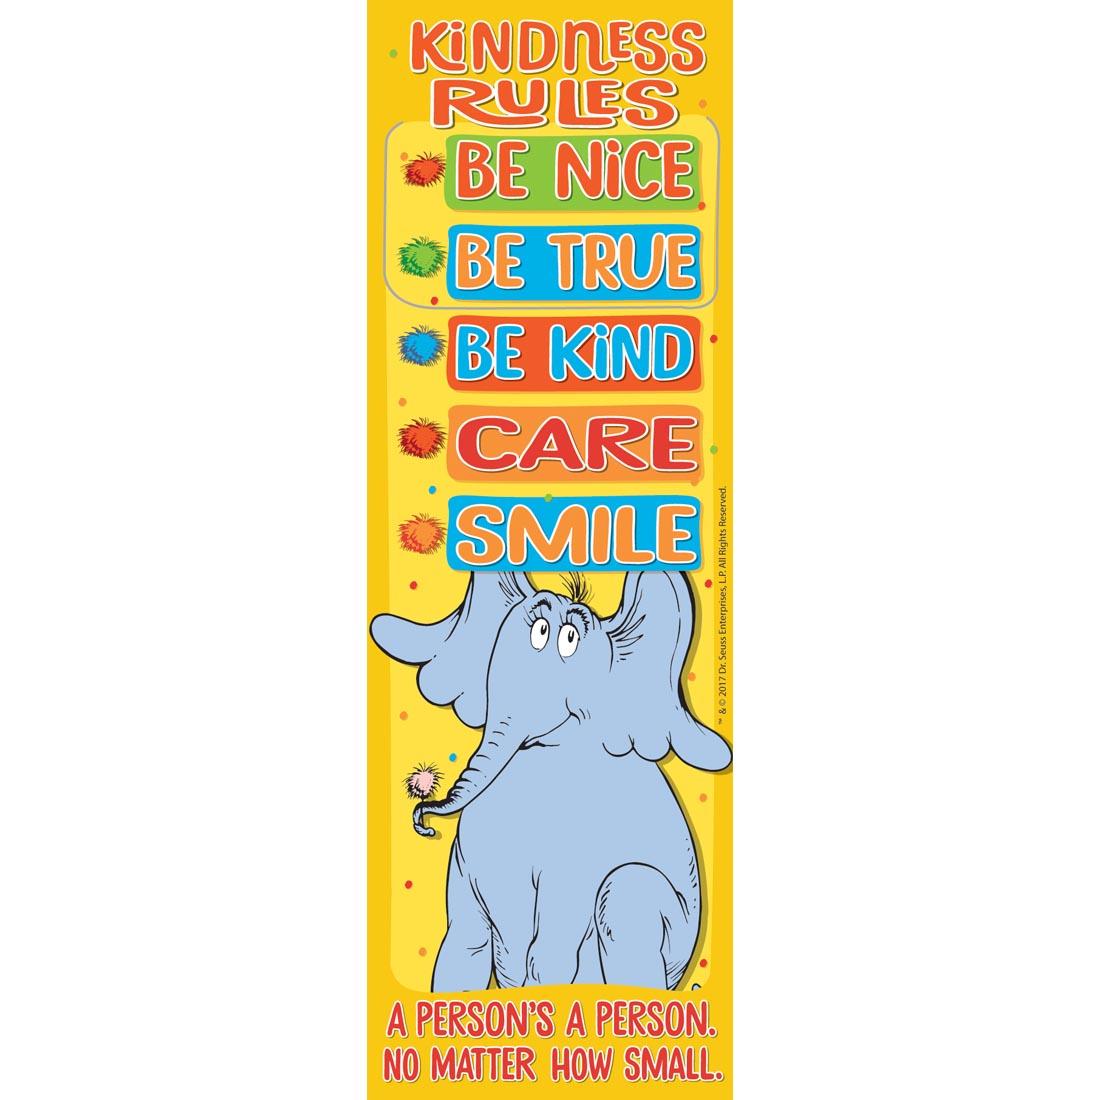 Horton Hears A Who Kindness Rules Bookmark by Eureka lists Be Nice, Be True, Be Kind, Care, Smile; A Person's a Person No Matter How Small